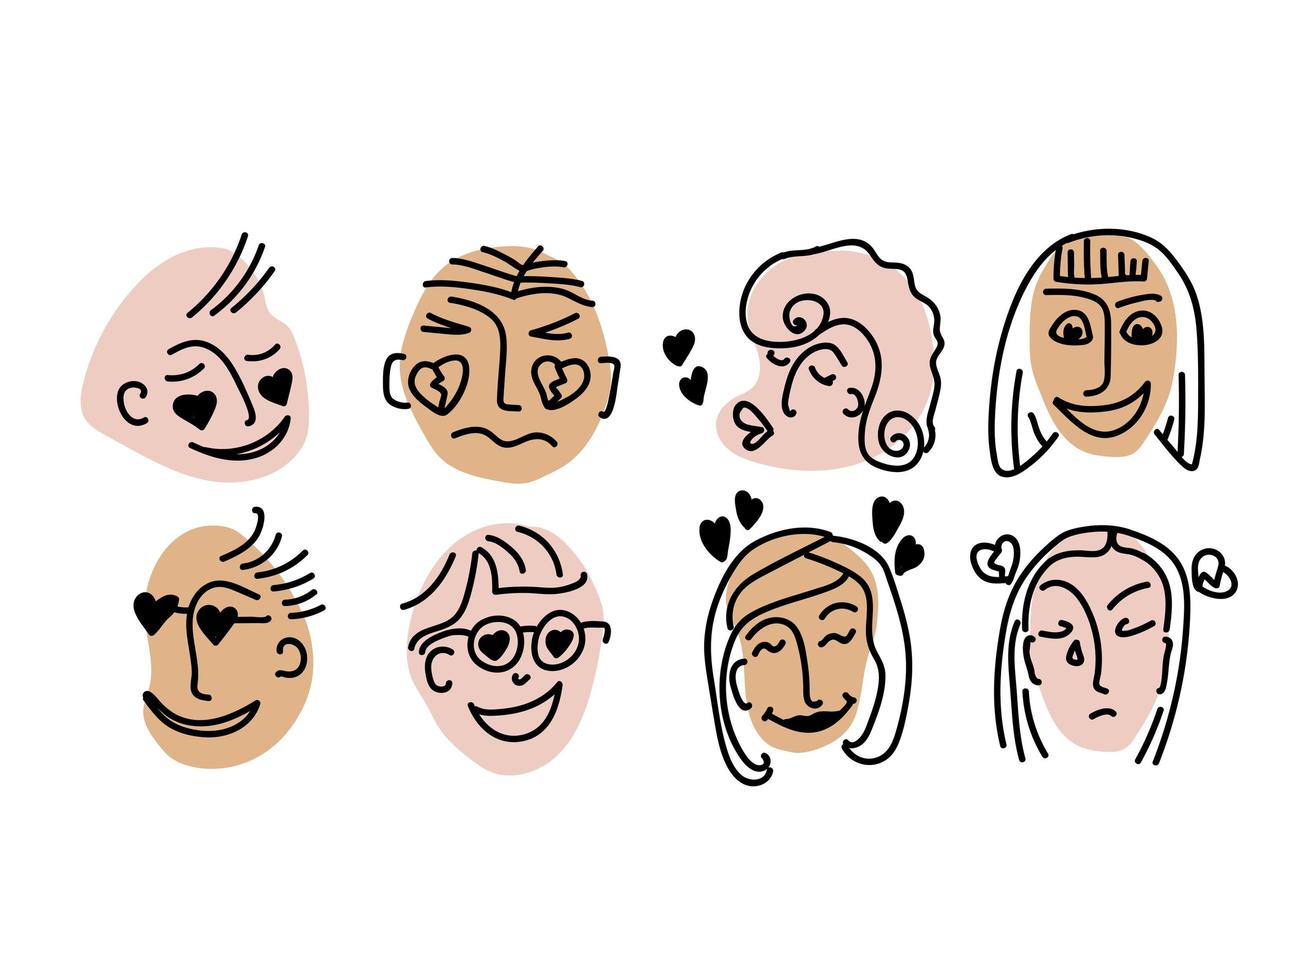 Doodle People in Love. Faces with emotions of love, happiness, flirting, romance, anger, sadness, passion. Icons for Valentines Day. For poster, t-shirts and card. Hand drawn vector illustration